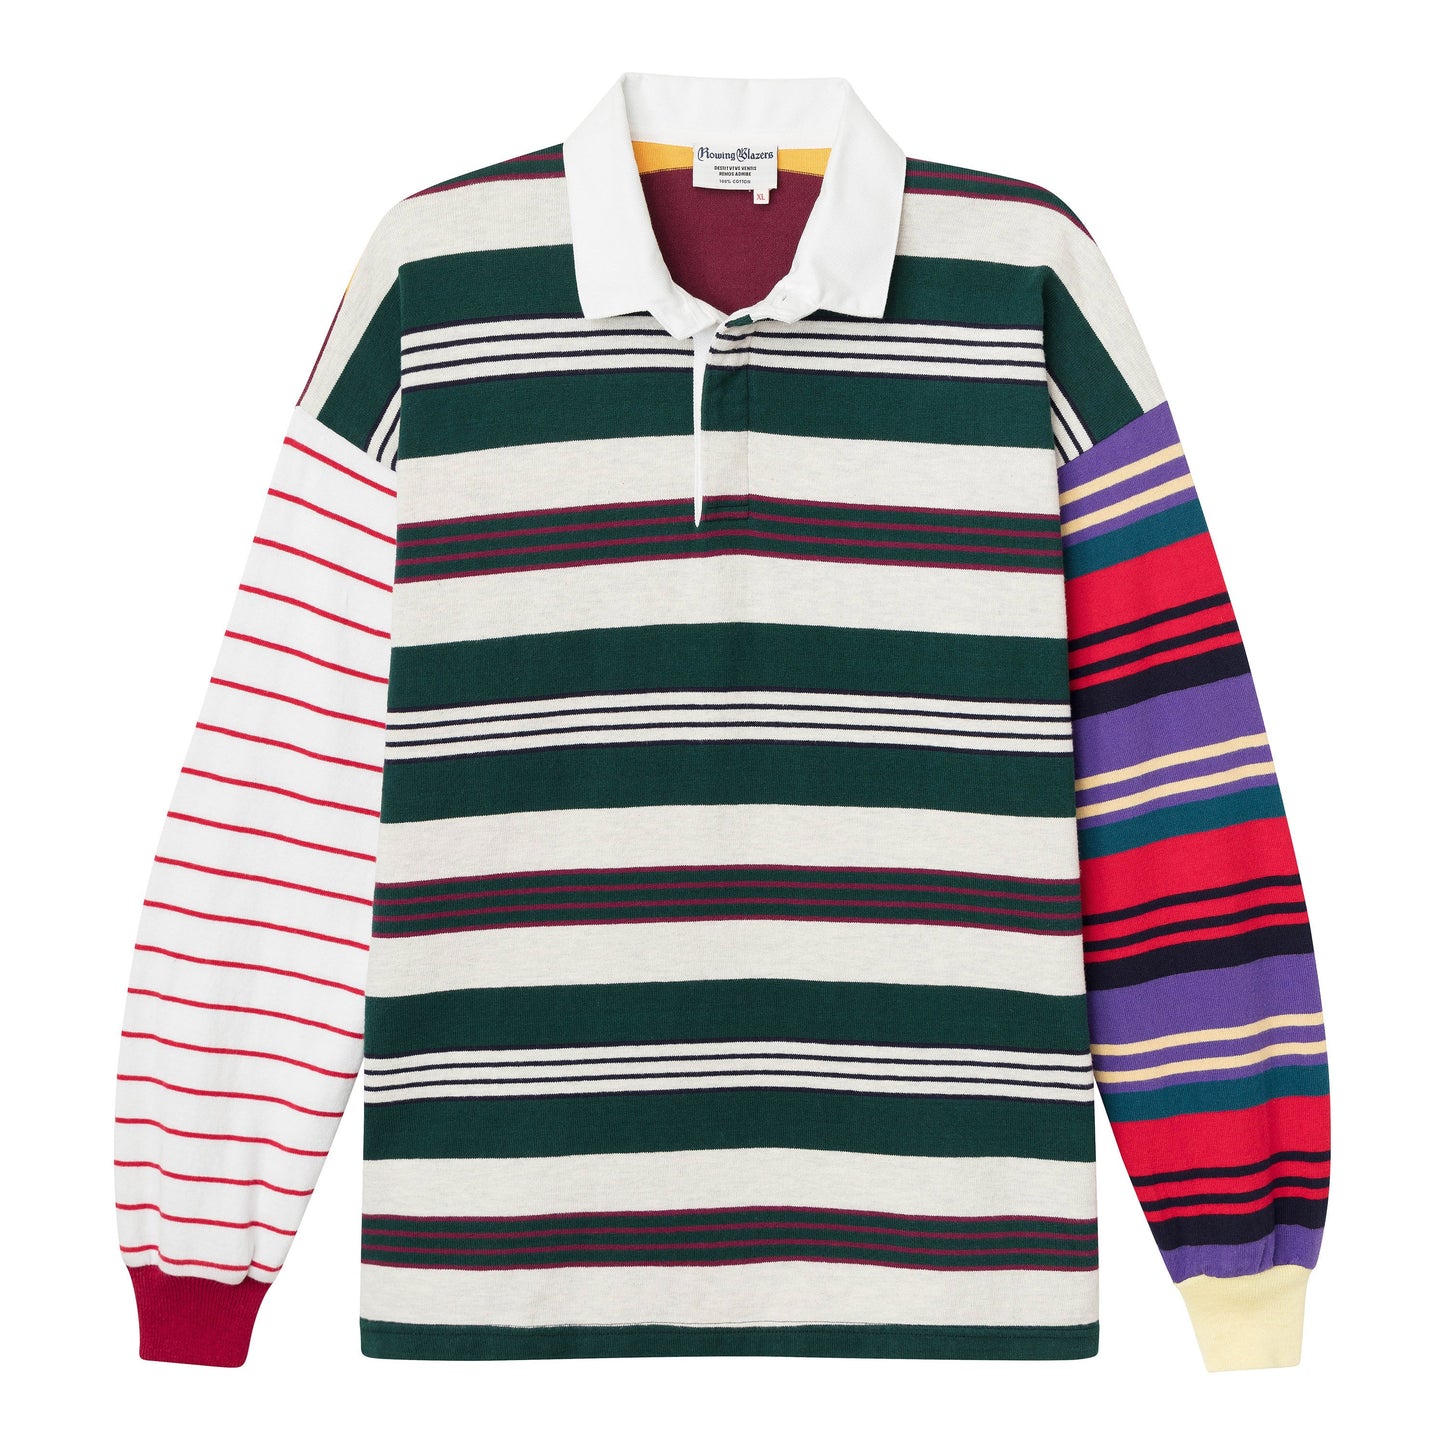 One-of-one striped rugby shirt made from leftover fabric. Green, white, and red stripes on the body and mismatched sleeves. Each is unique.